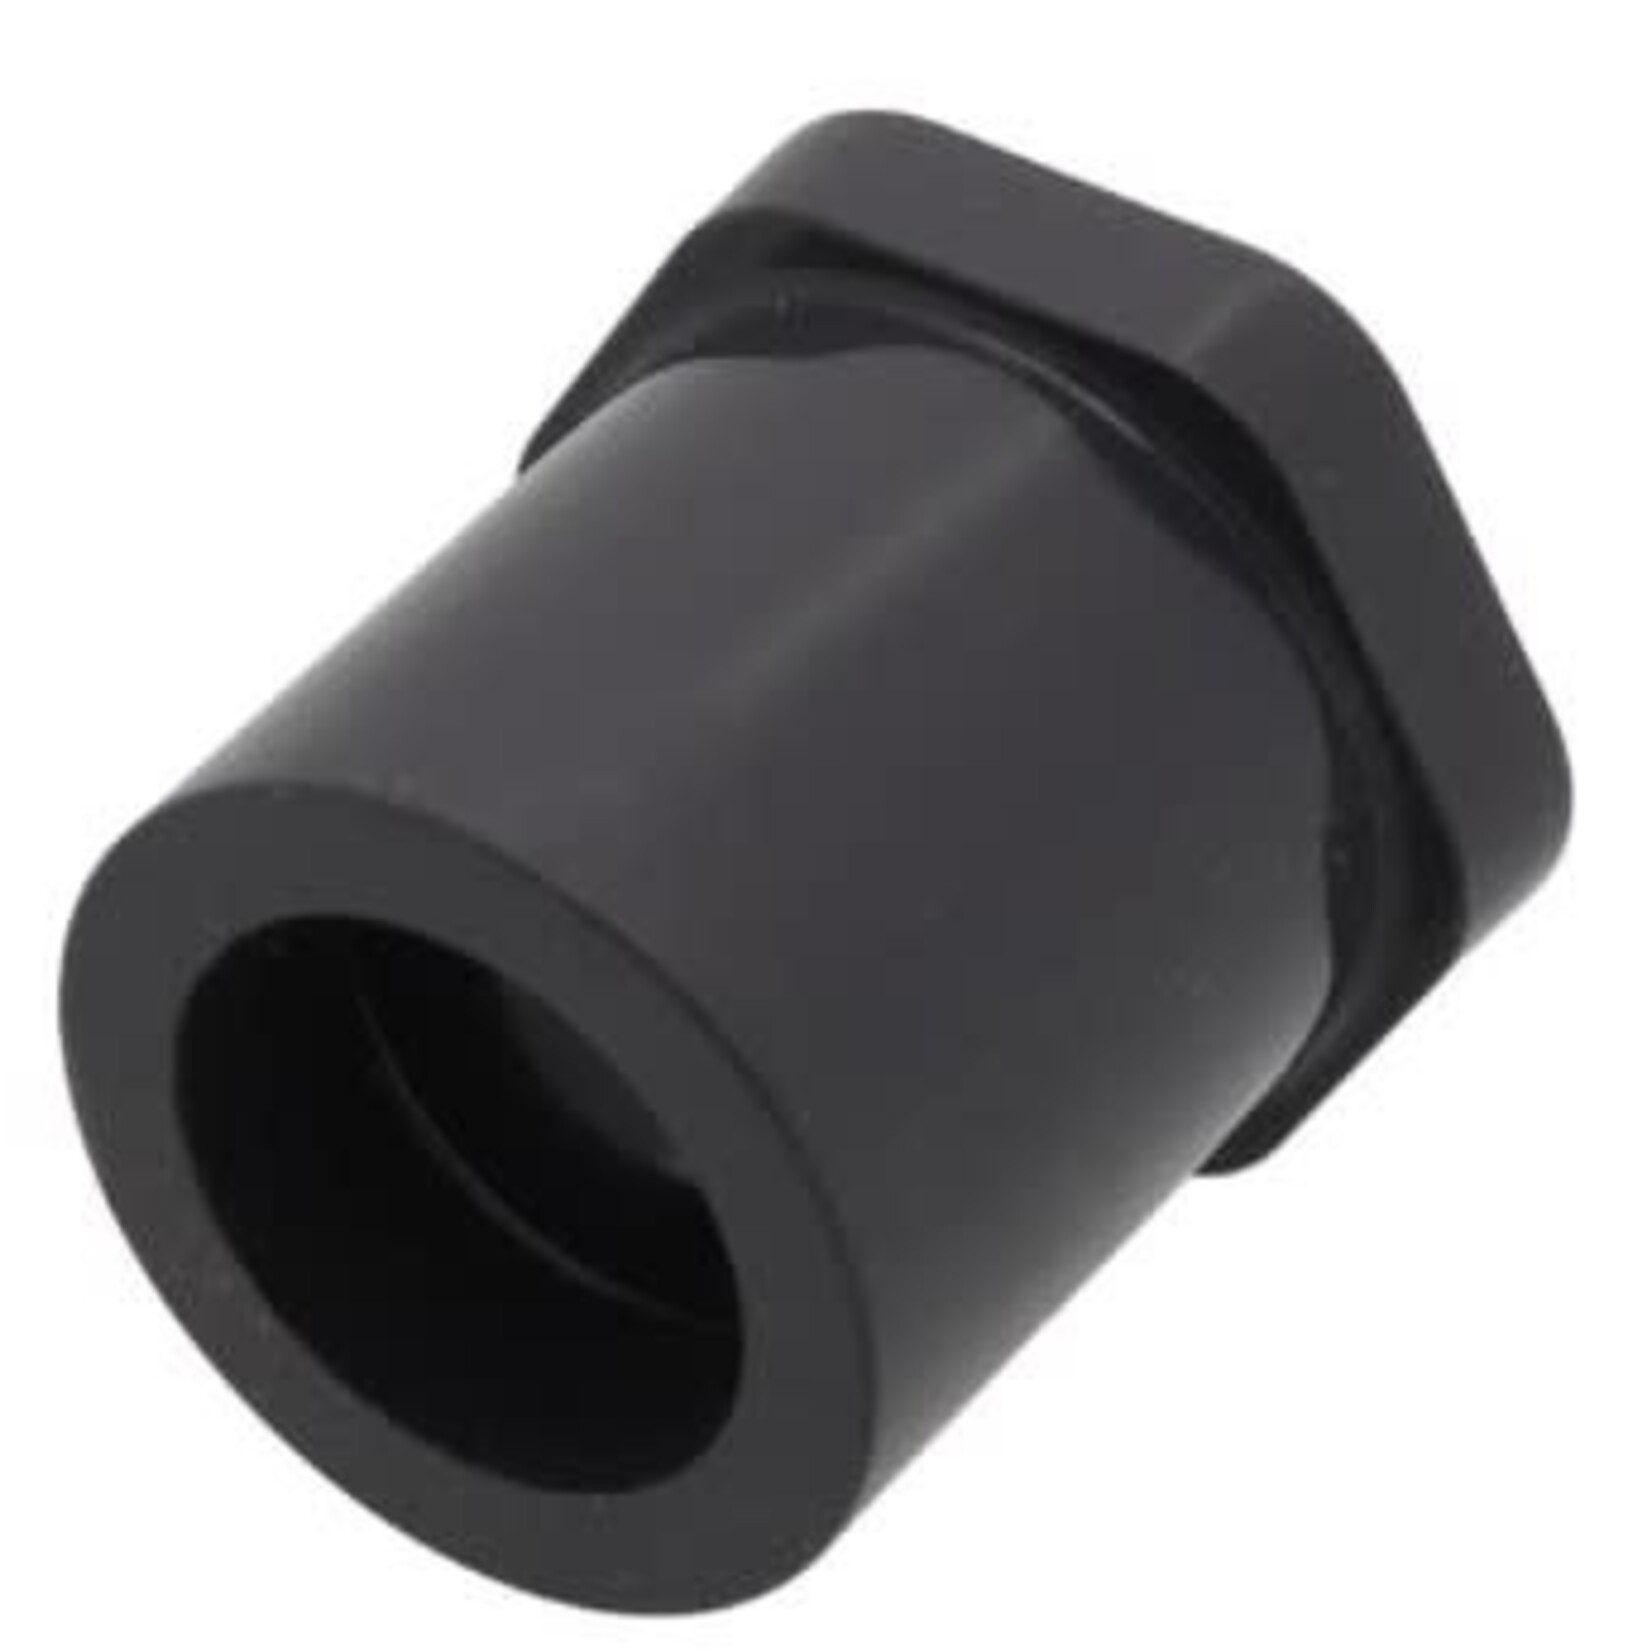 SPEARS 3/4 IN X 1/2 IN PVC SCHEDULE 80 REDUCER BUSHING